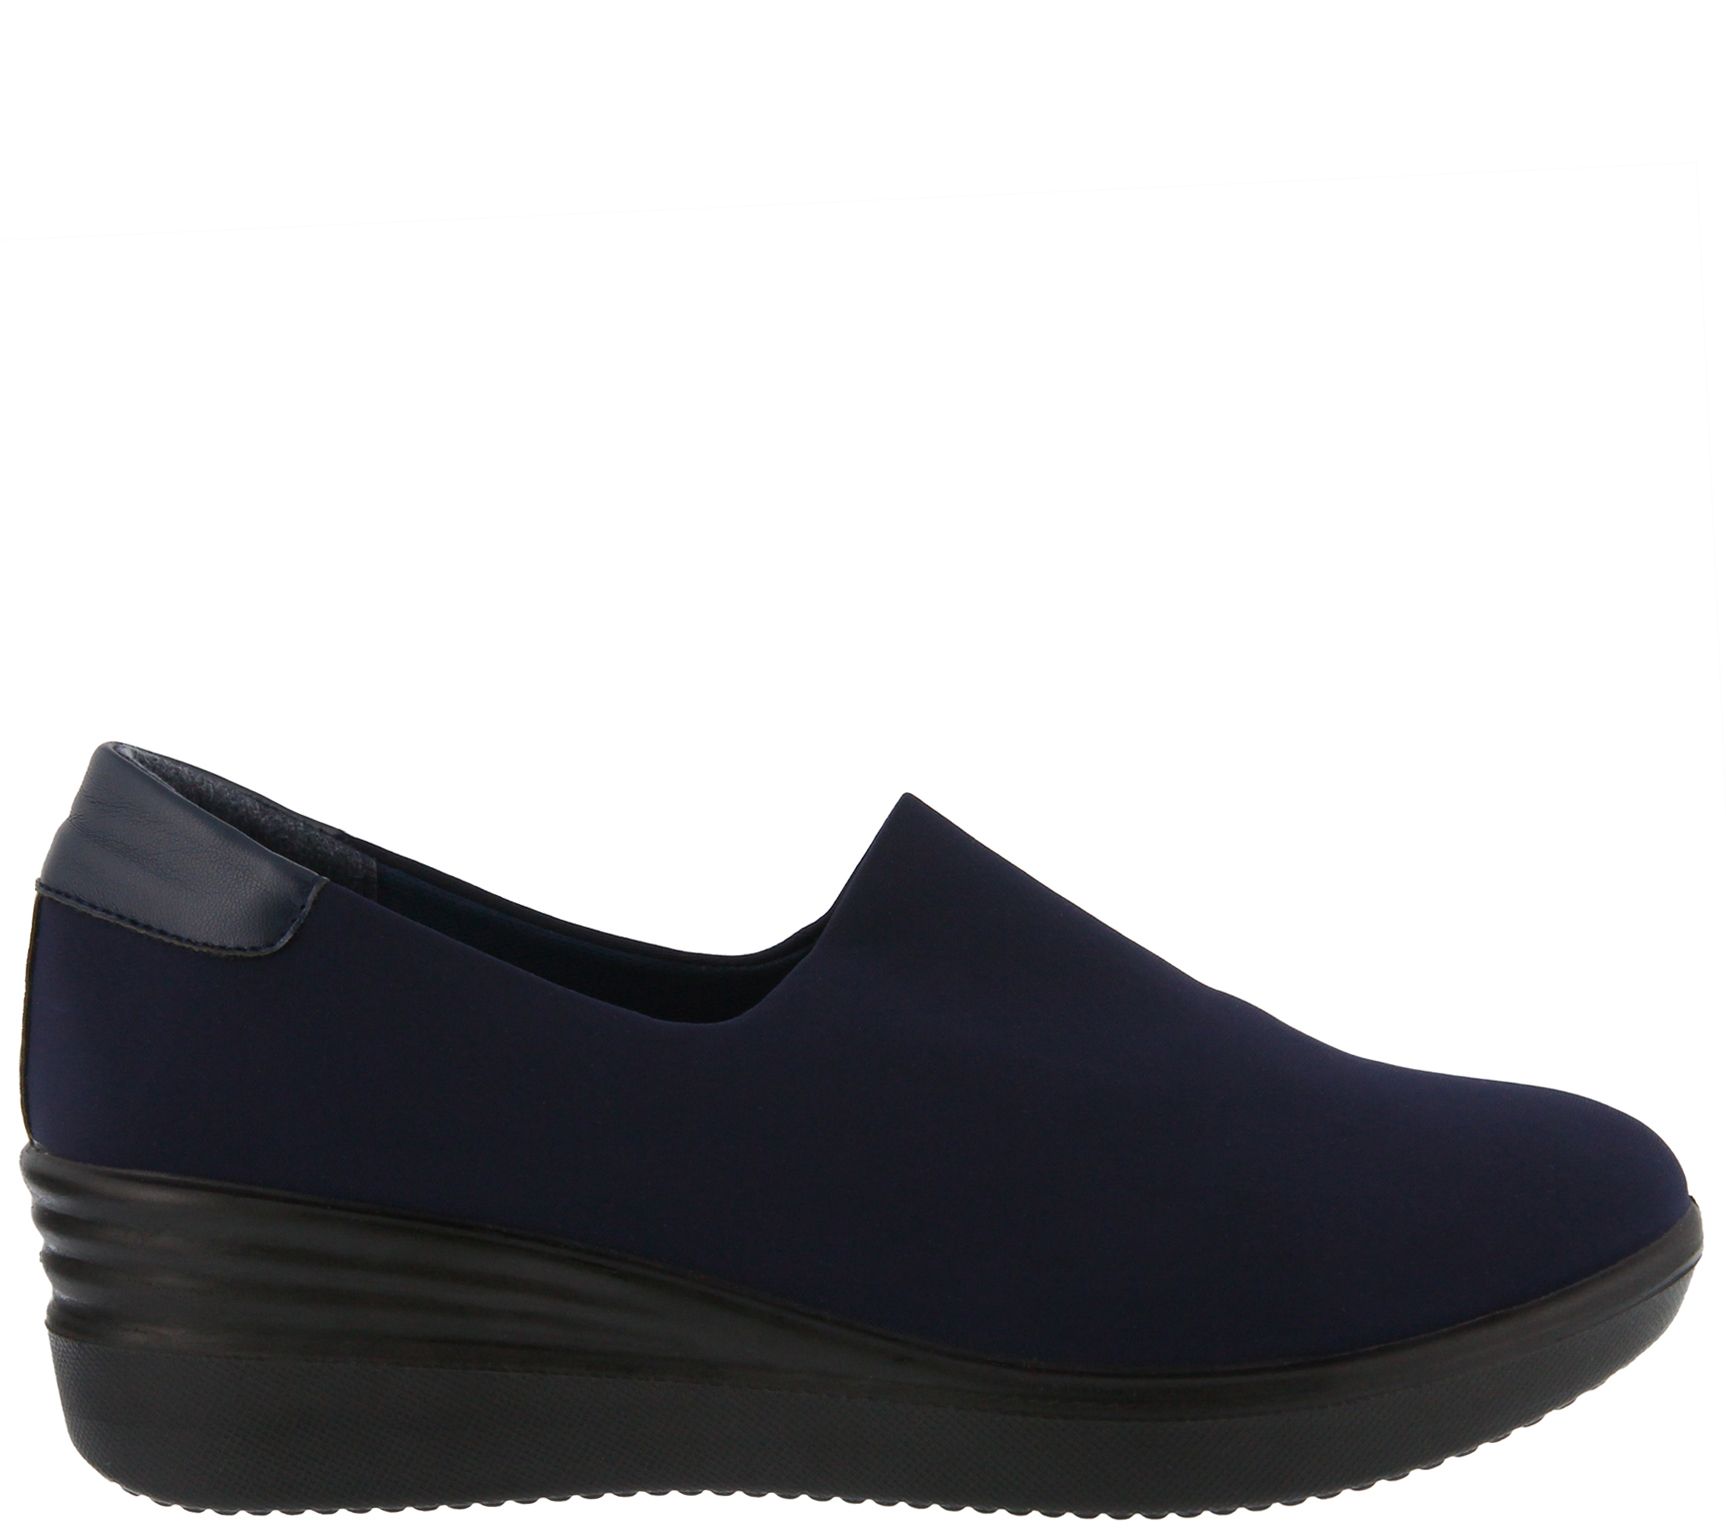 Flexus by Spring Step Lycra Slip-On Shoes - Noral - QVC.com